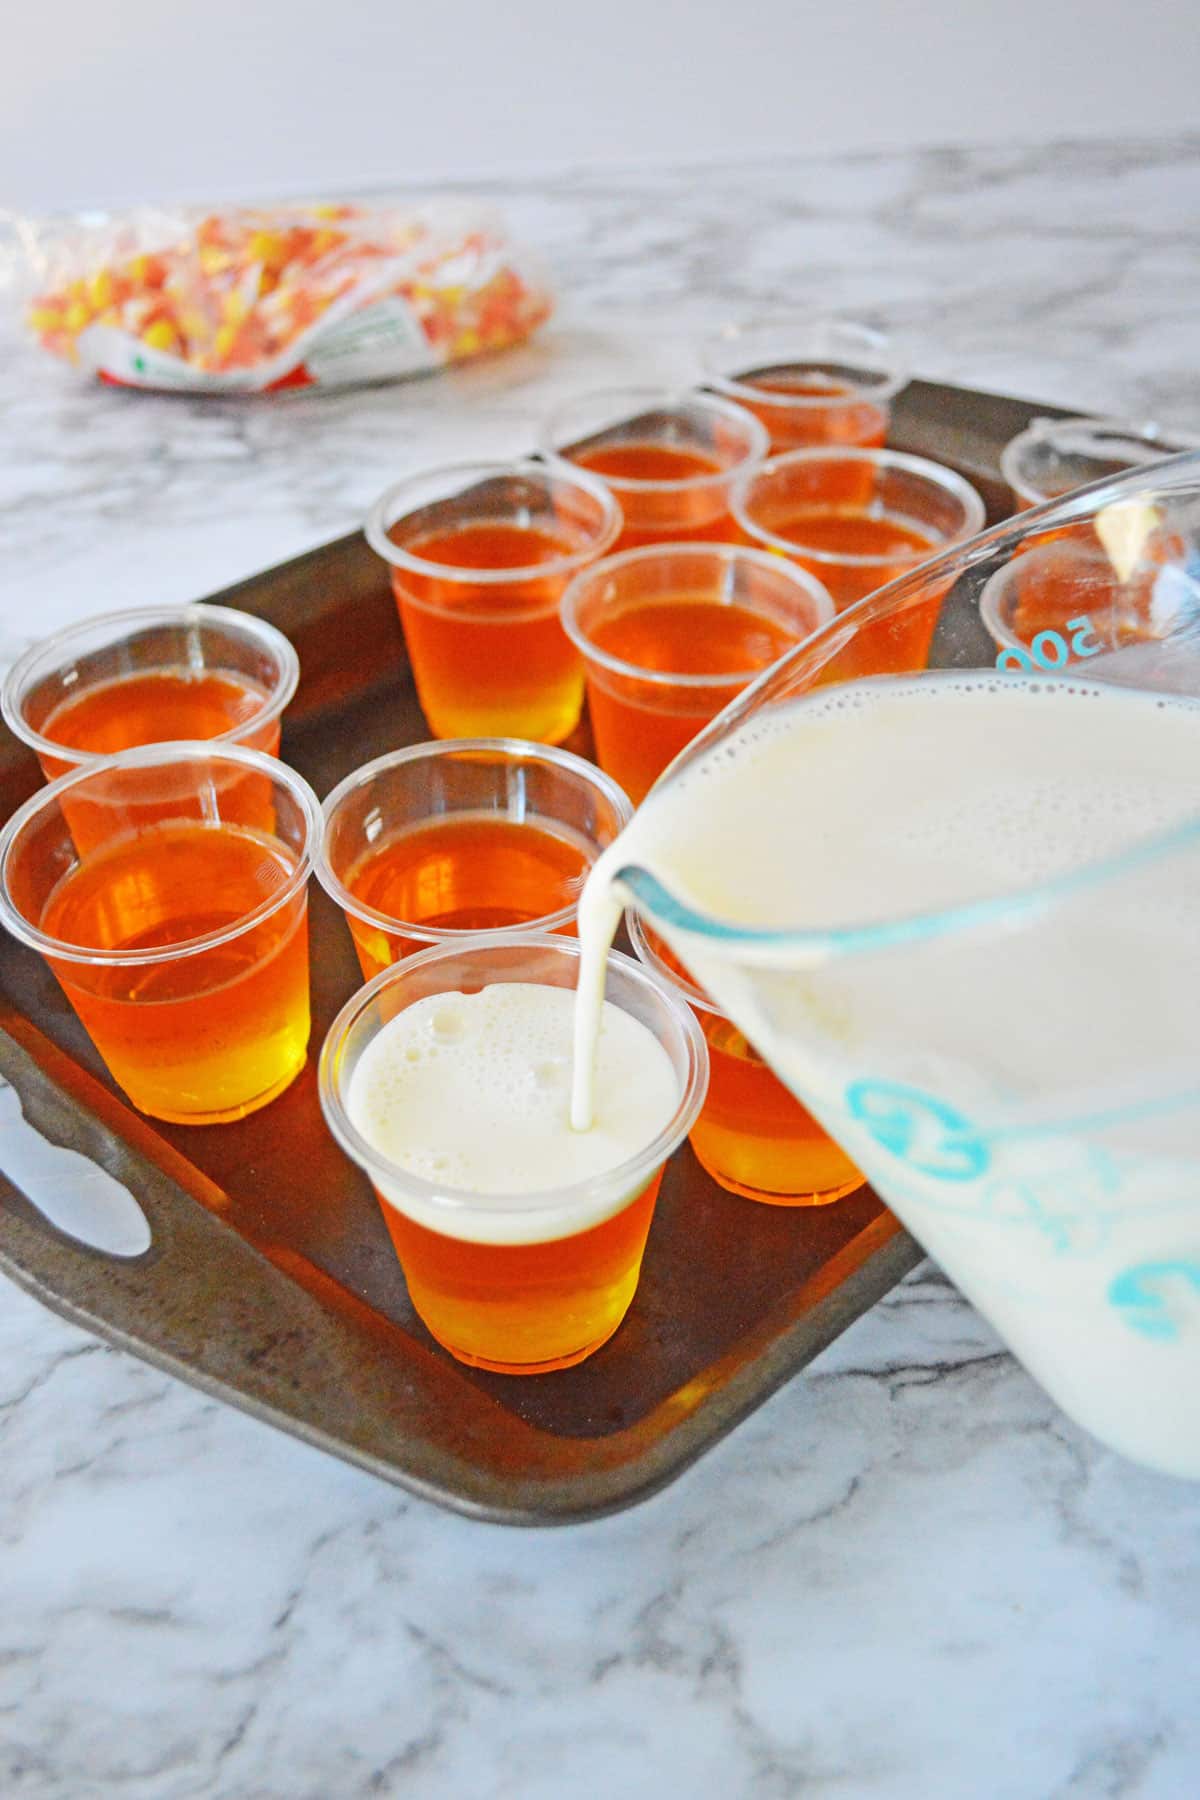 A mixture of sweetened milk, vodka and whipped vodka for candy corn jello shots